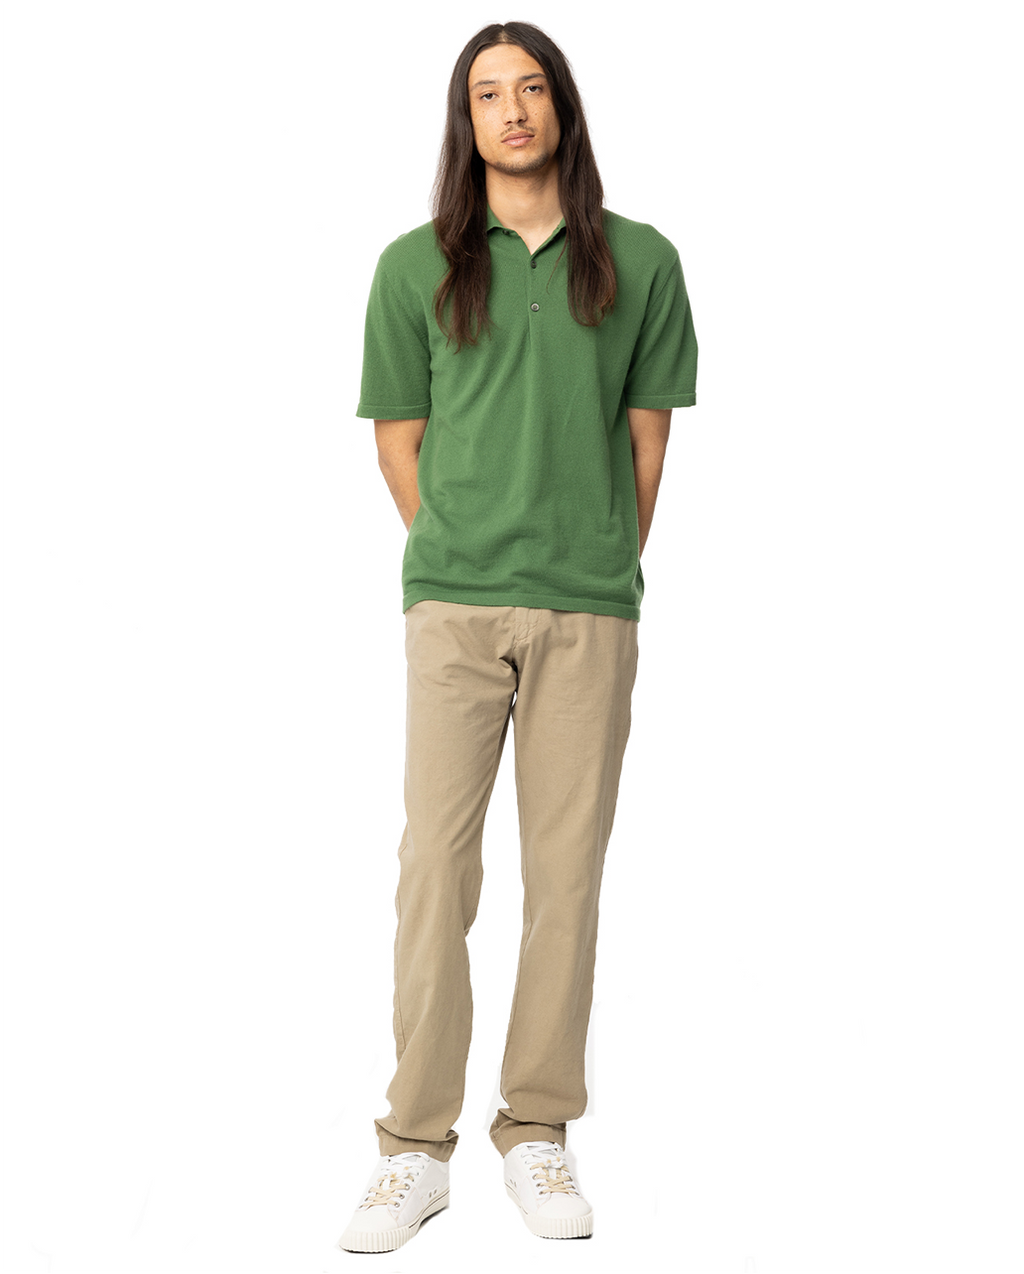 man standing in green polo tee with khaki pants with his hands behind his back. Link leads to men's tee collection